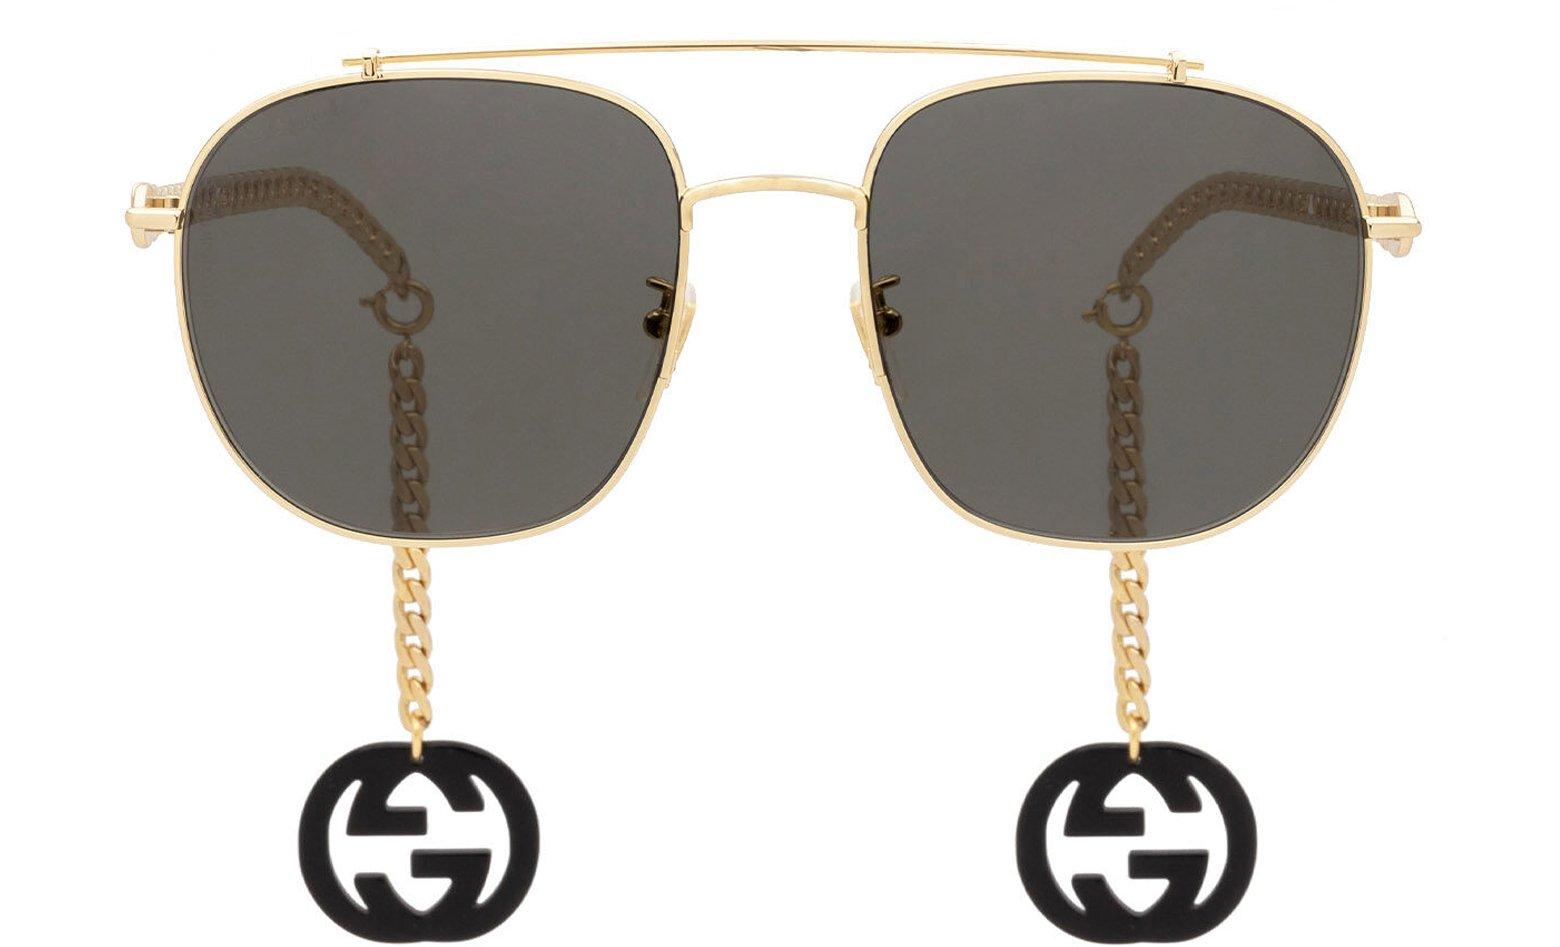 Gucci Gold/Grey Metal Square-Frame Men's Sunglasses w/Charm at FORZIERI